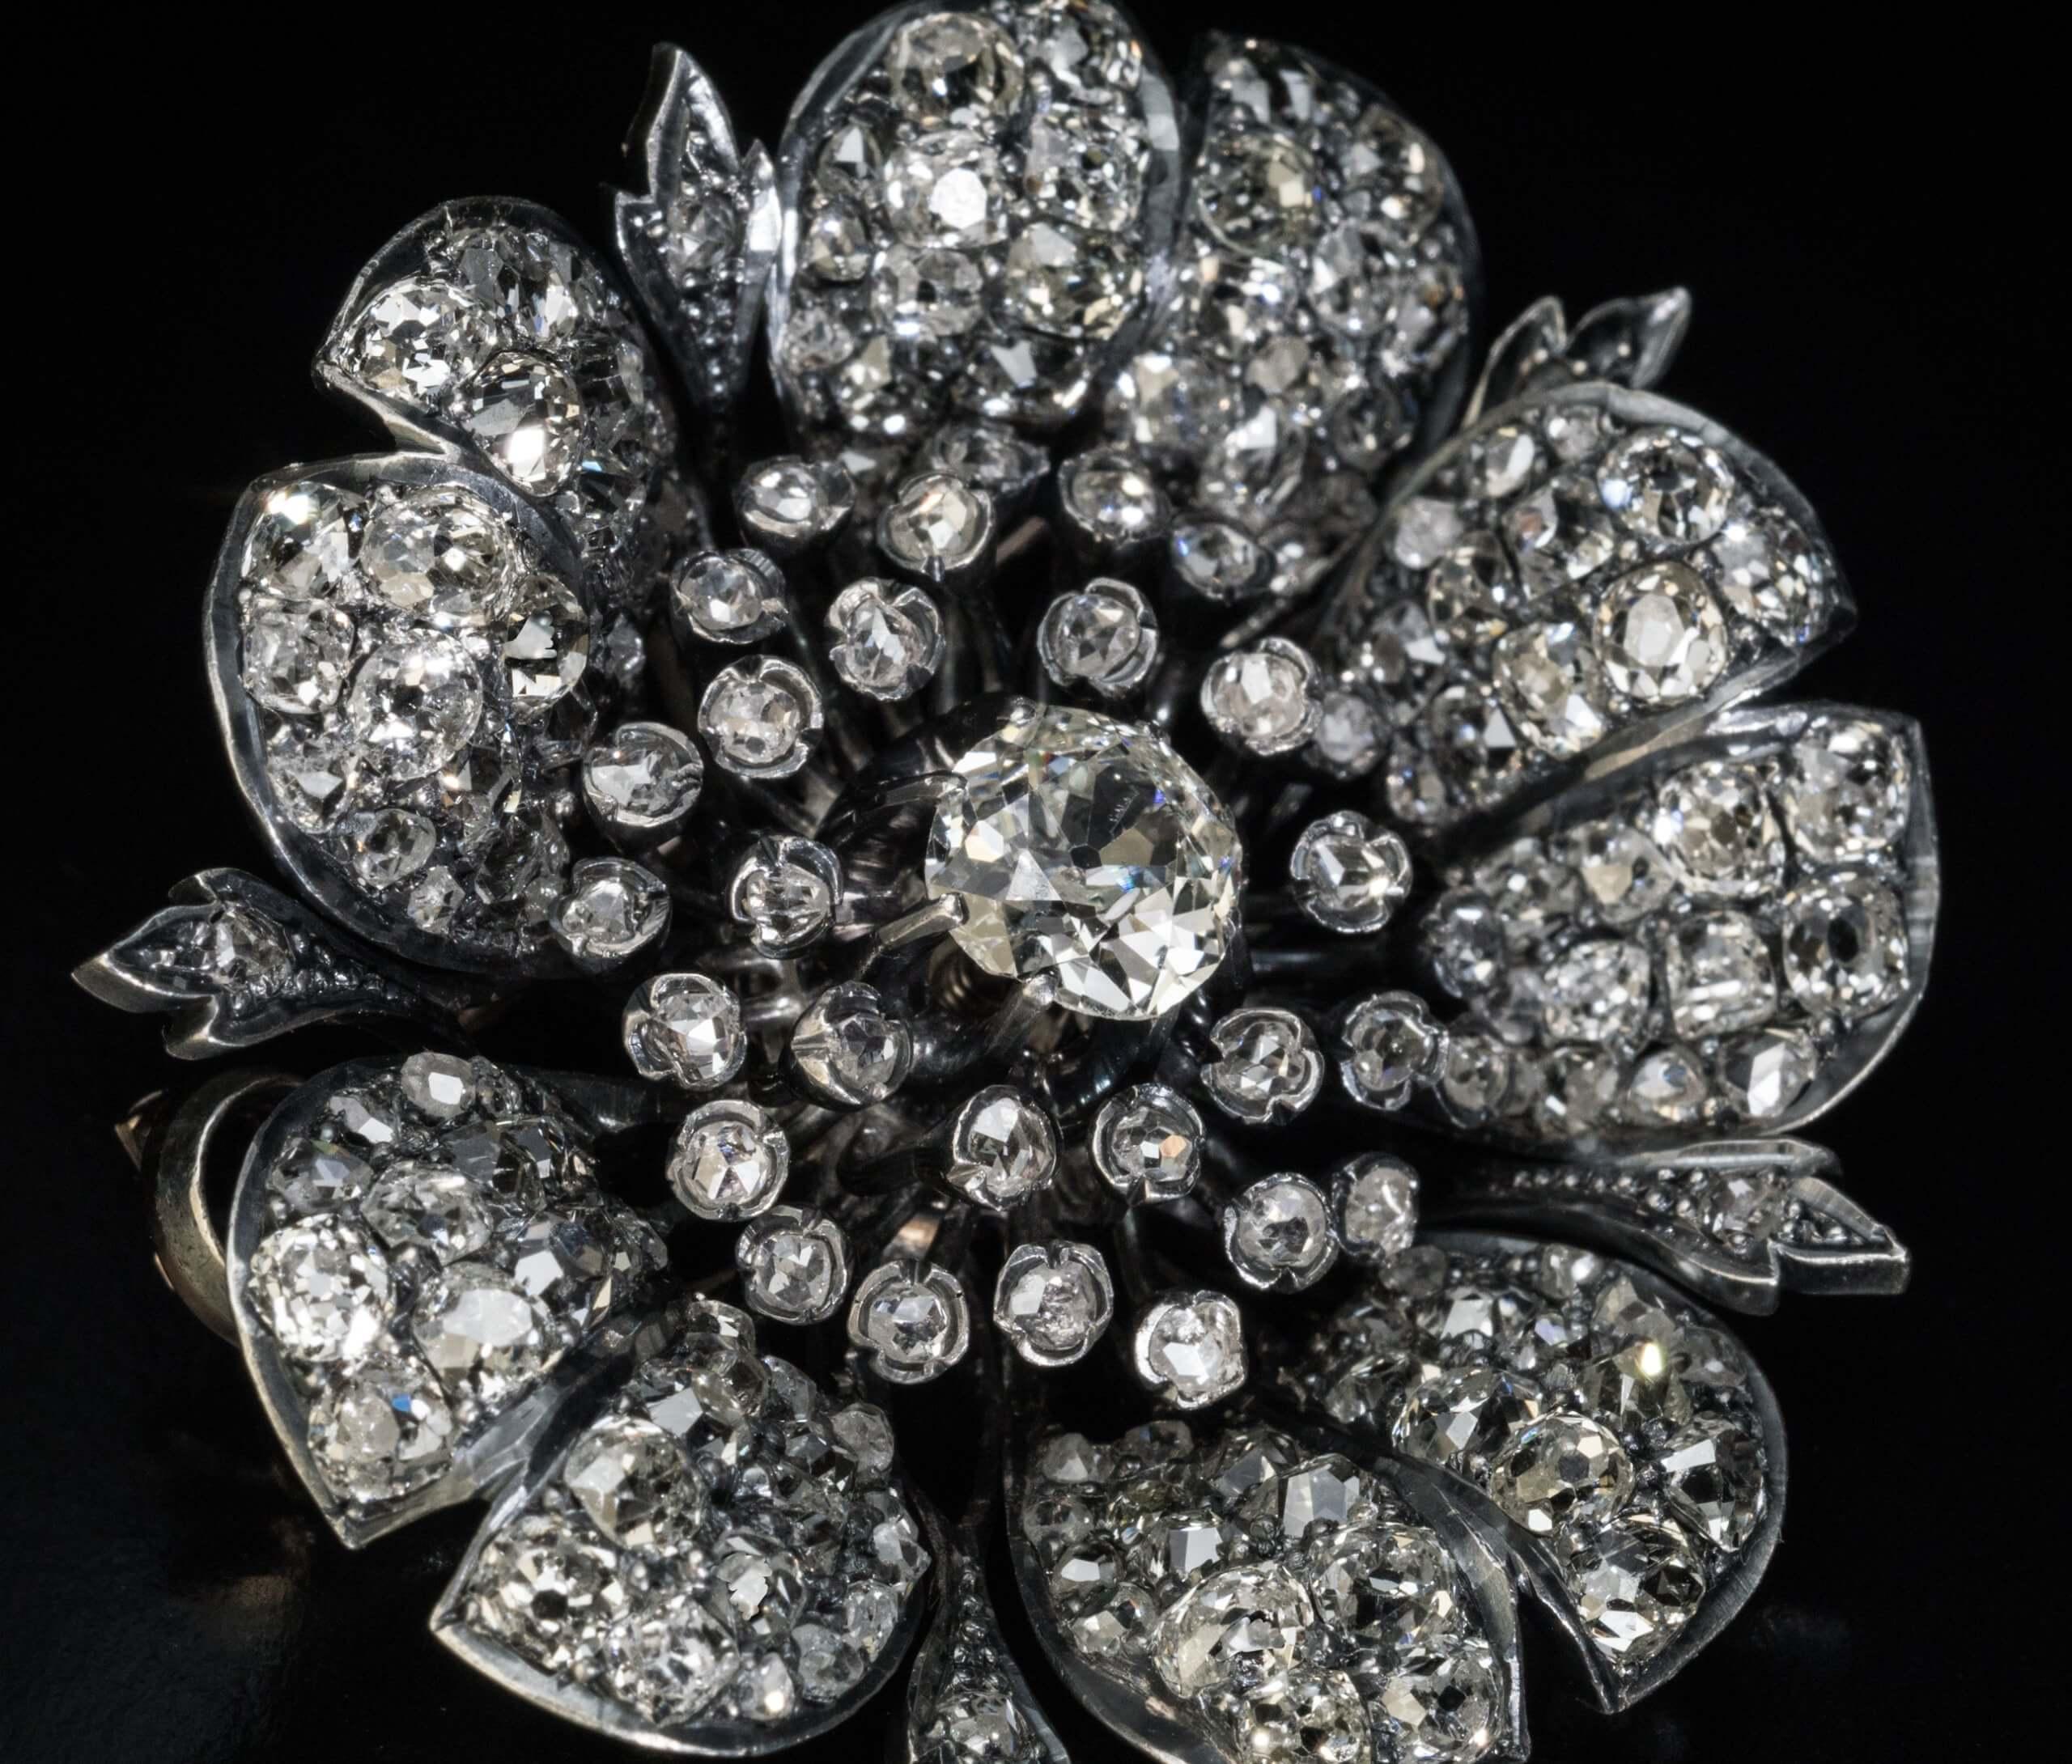 Circa 1880s – 1890s  This Victorian era flower head brooch is finely crafted in silver topped 18K gold (front – silver, back – gold). It is centered with an old mine cut diamond (6.4 x 6.3 mm, approximately 1.10 carats) surrounded by numerous rose